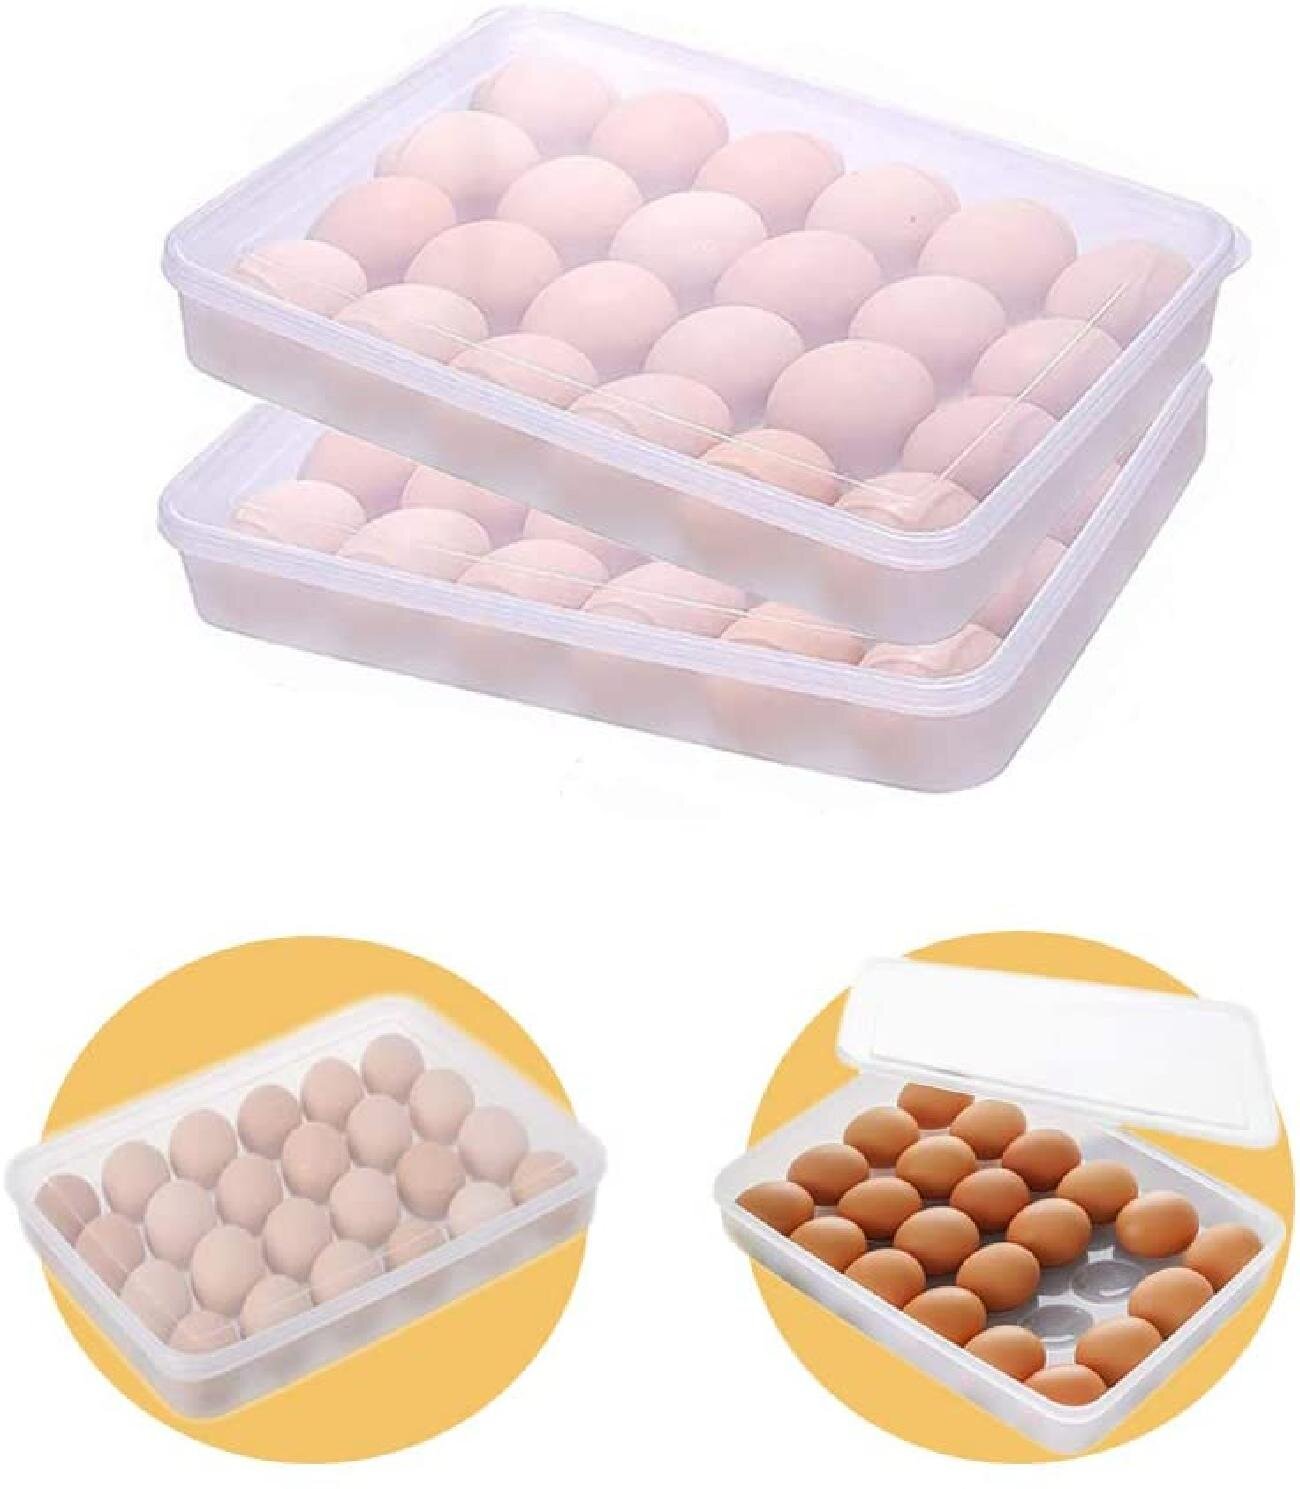 15-Cup Egg Holder Box Refrigerator Storage Tray Eggs Shatter-proof Egg Crate Storage Rack